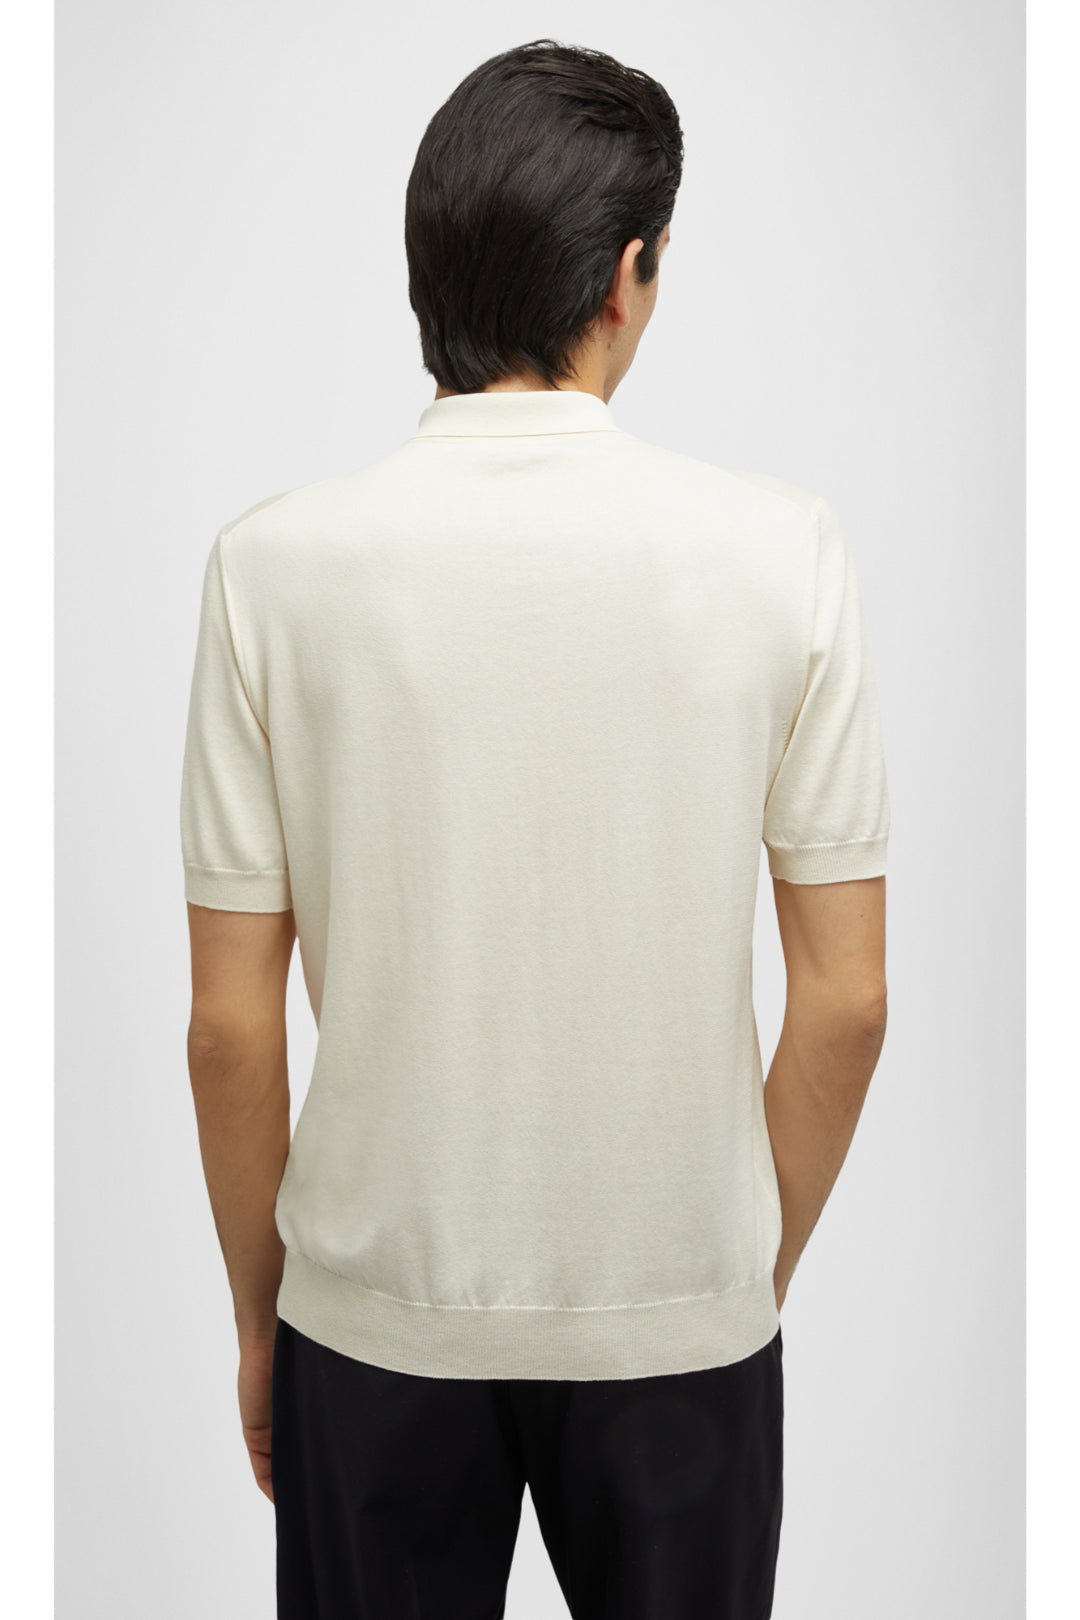 Silk and cotton polo shirt with zip